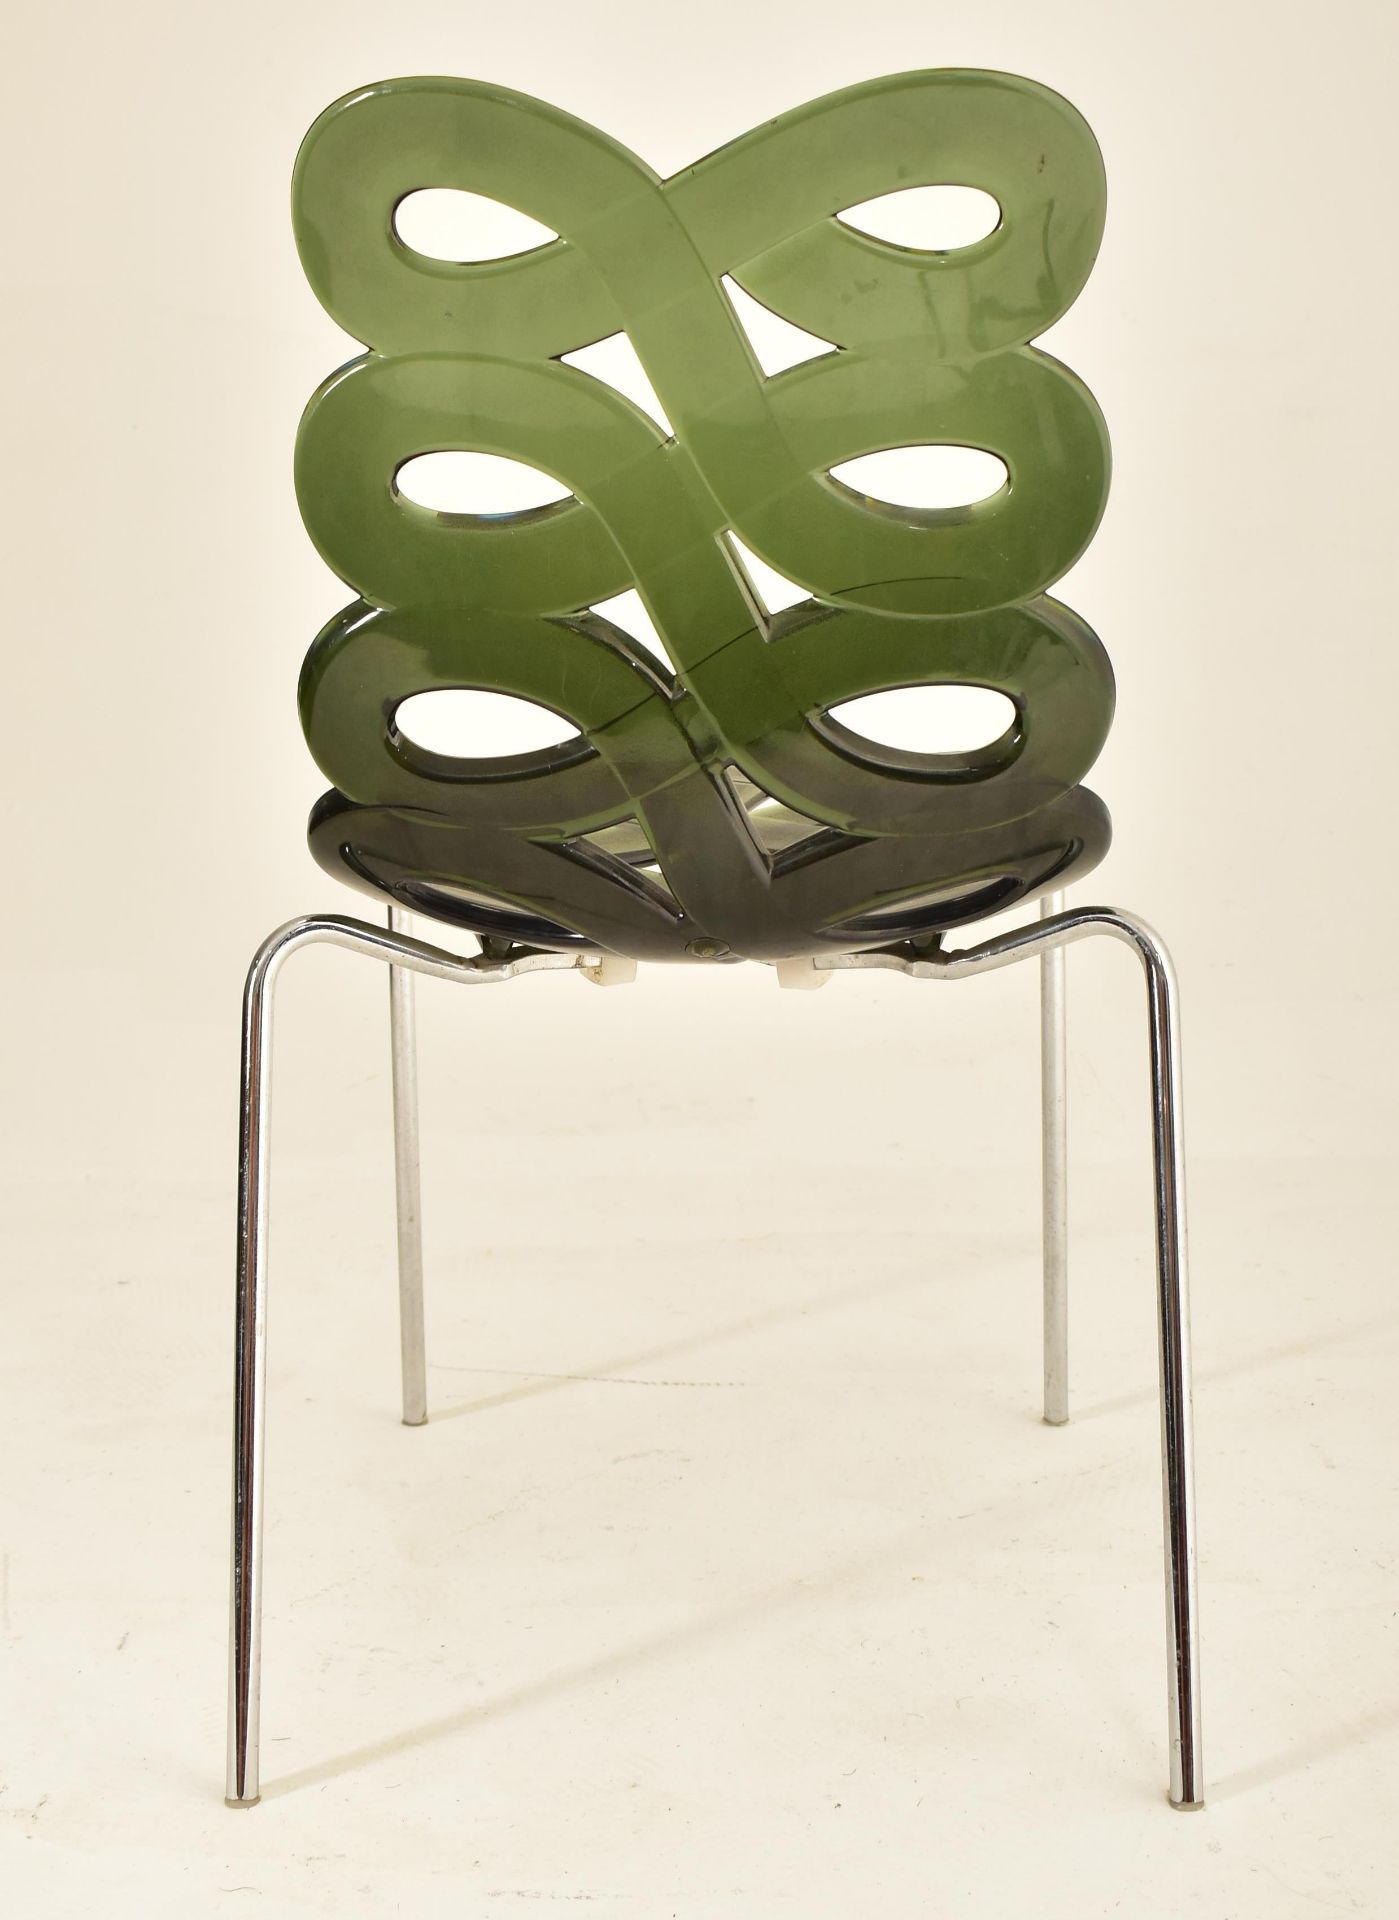 GINO CAROLLO FOR CIACCI KREATY - SET OF DIVA STACKING CHAIRS - Image 5 of 5